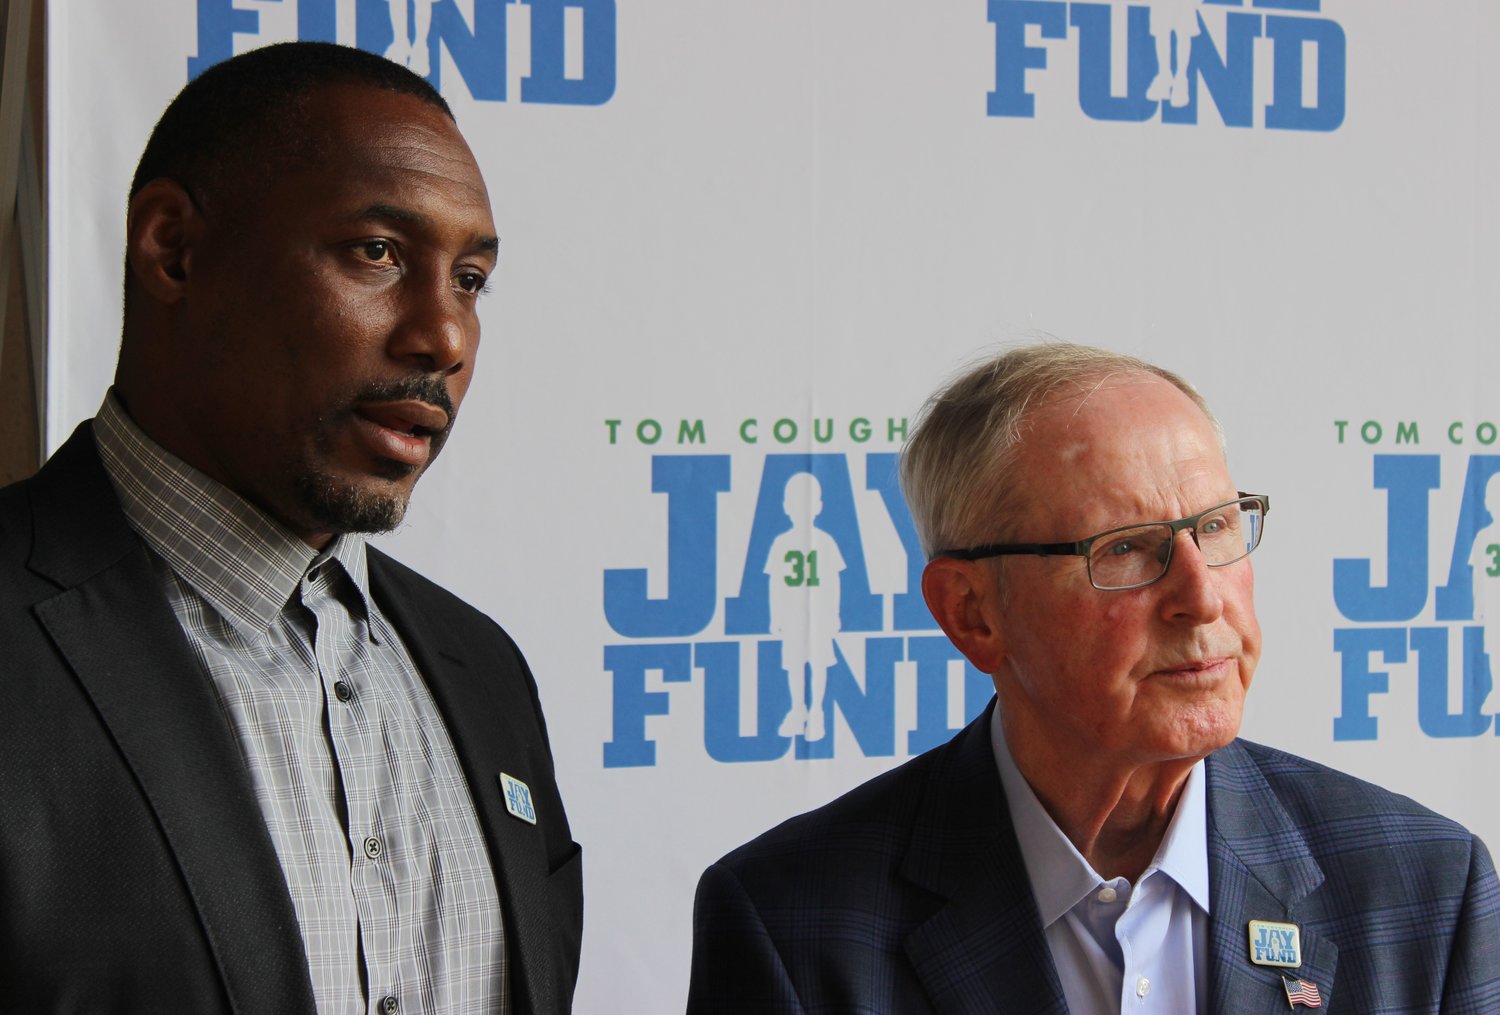 Coach Tom Coughlin, right, poses for a photo next to Jacksonville Jaguars Director of Player Development Marcus Pollard.